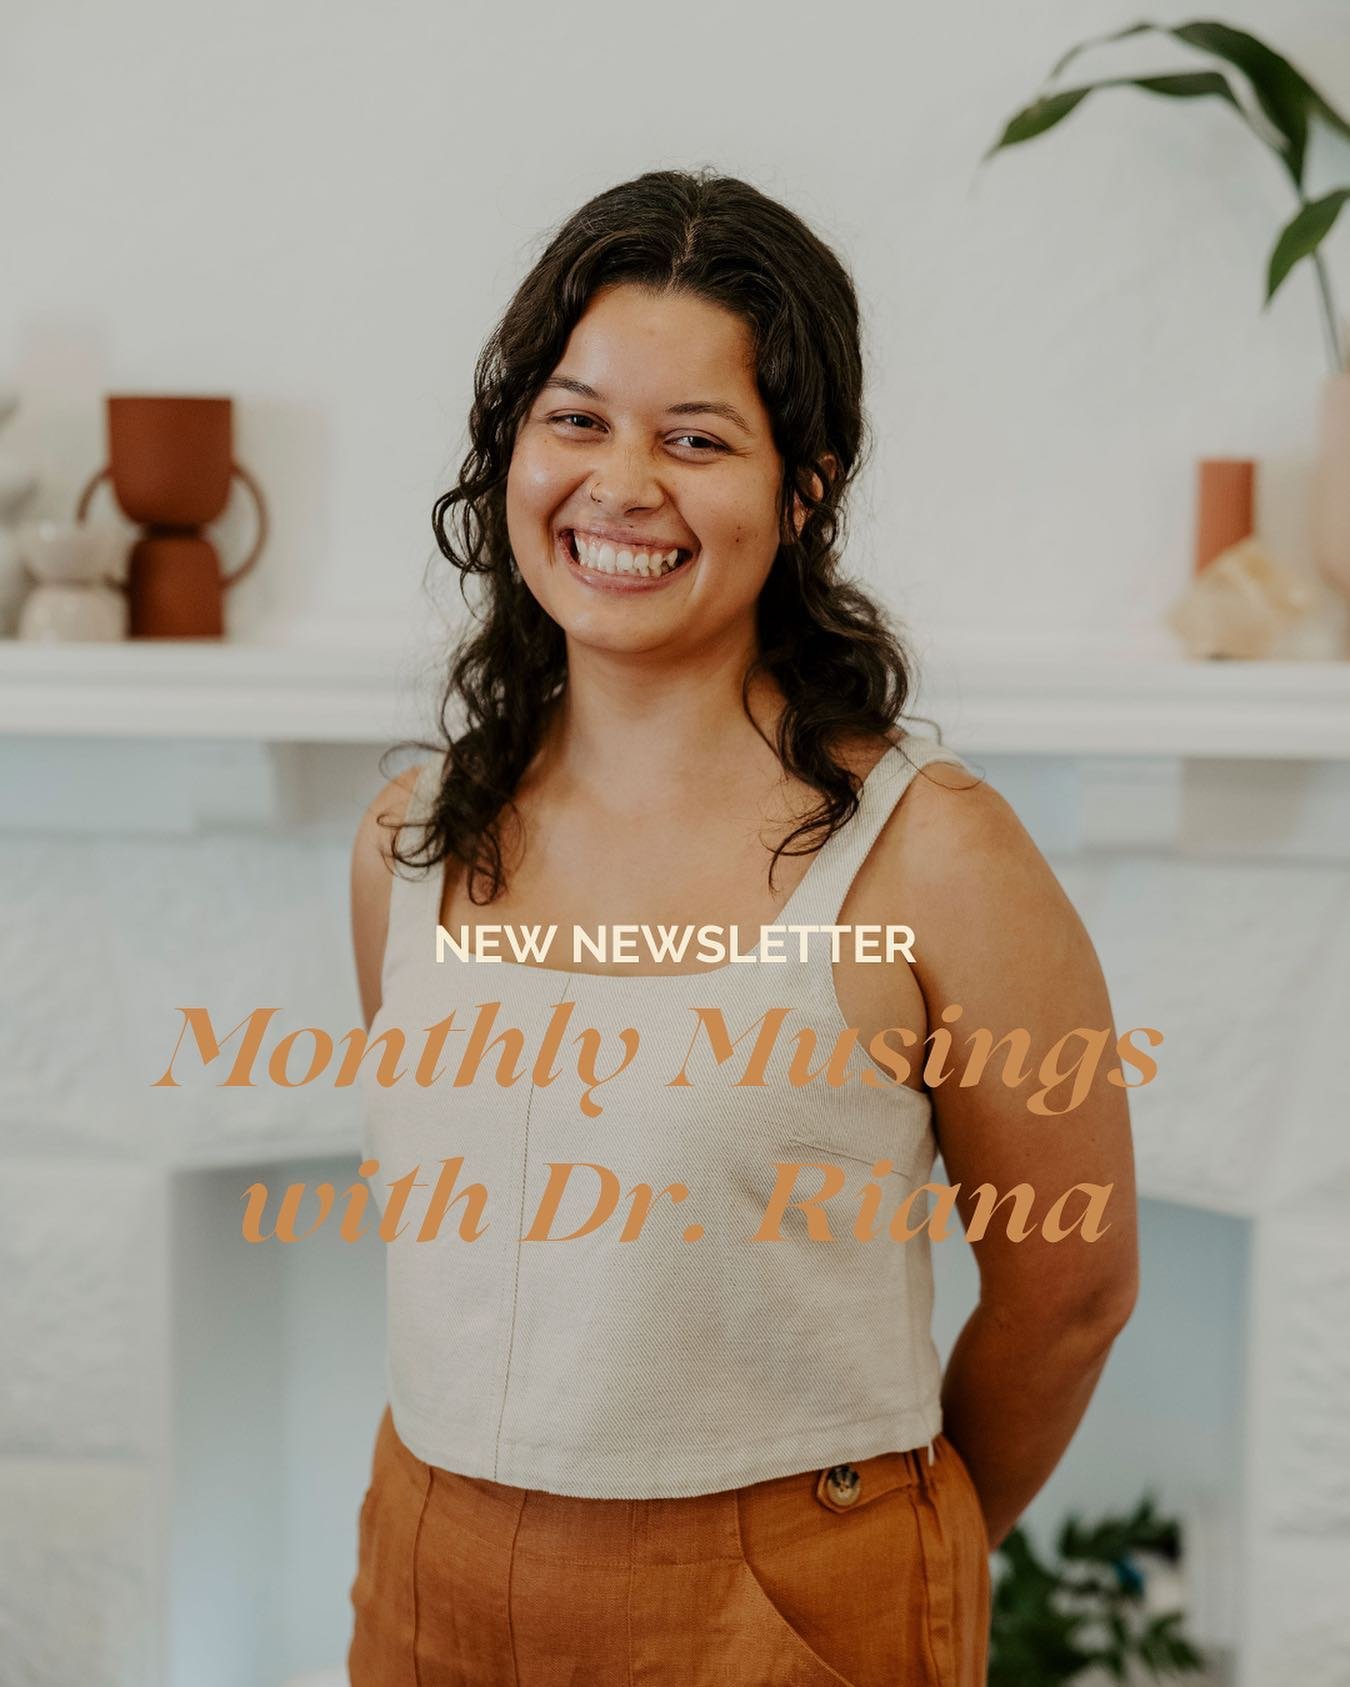 Read her first edition below 👇🏼

Hello there, lovely humans of Body Riches Chiropractic!

I&rsquo;m excited to present to you the very first edition of our new monthly newsletter! This will be a time for you to relax and tune into some thoughts tha